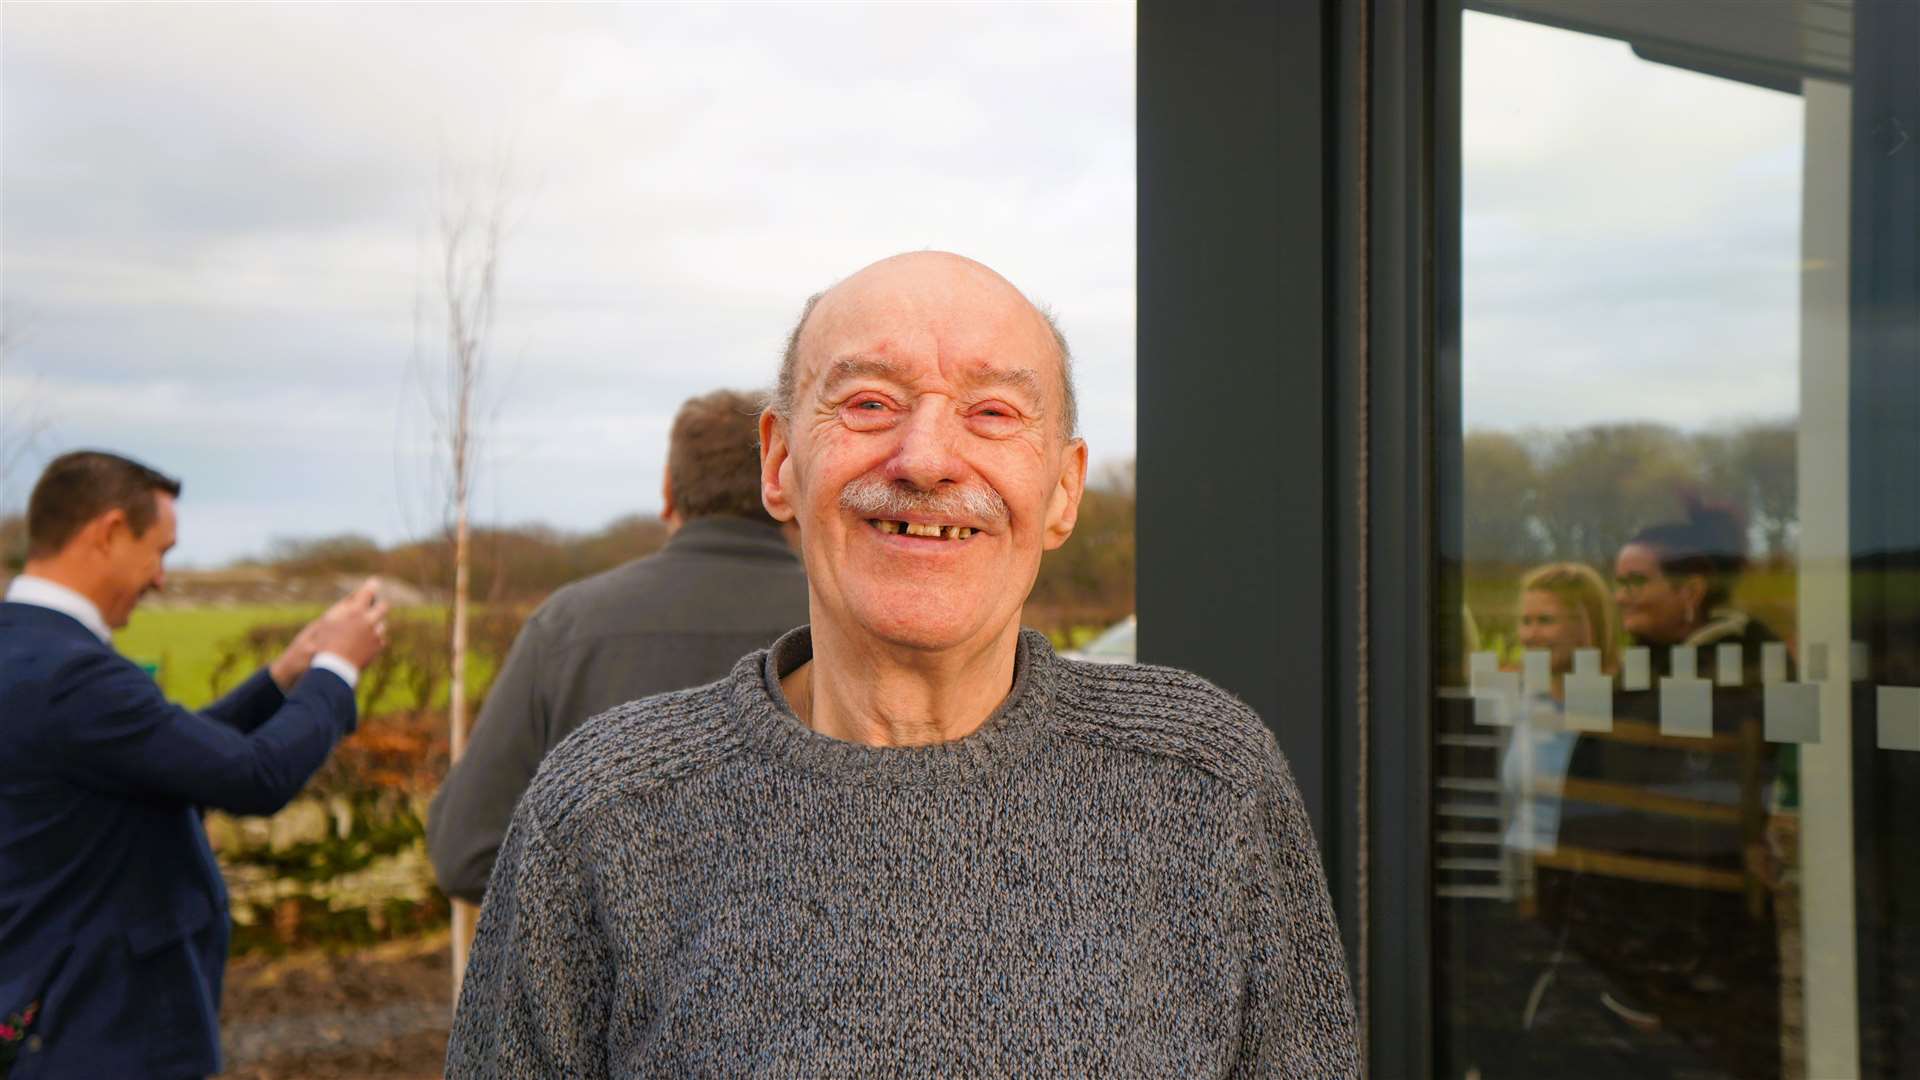 John Goodbrand from Thurso was one of the visitors on the open day event. Picture: DGS